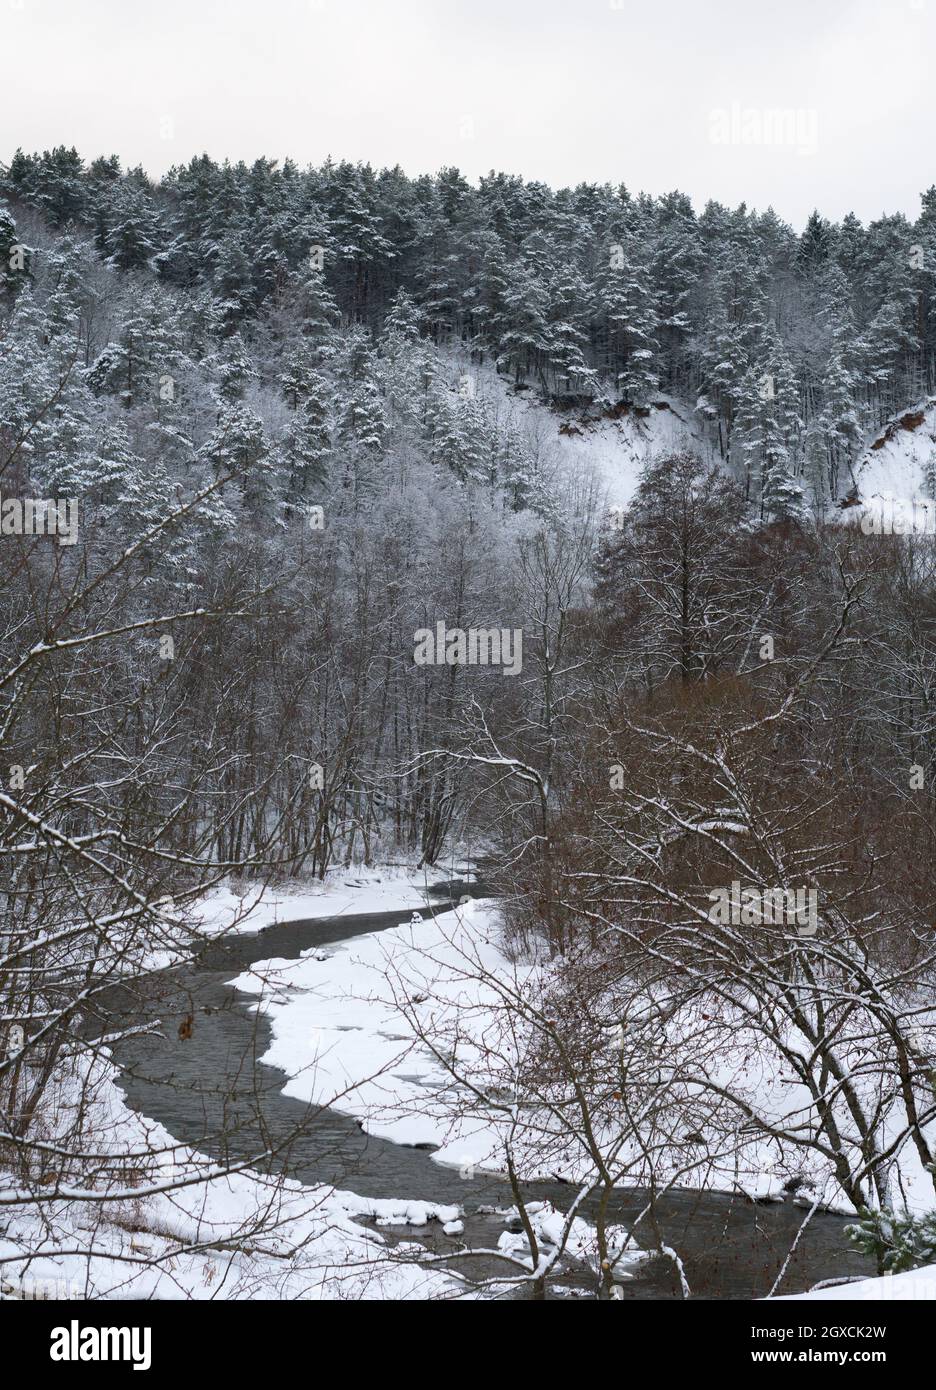 Winter landscape with river and snowy forest Stock Photo